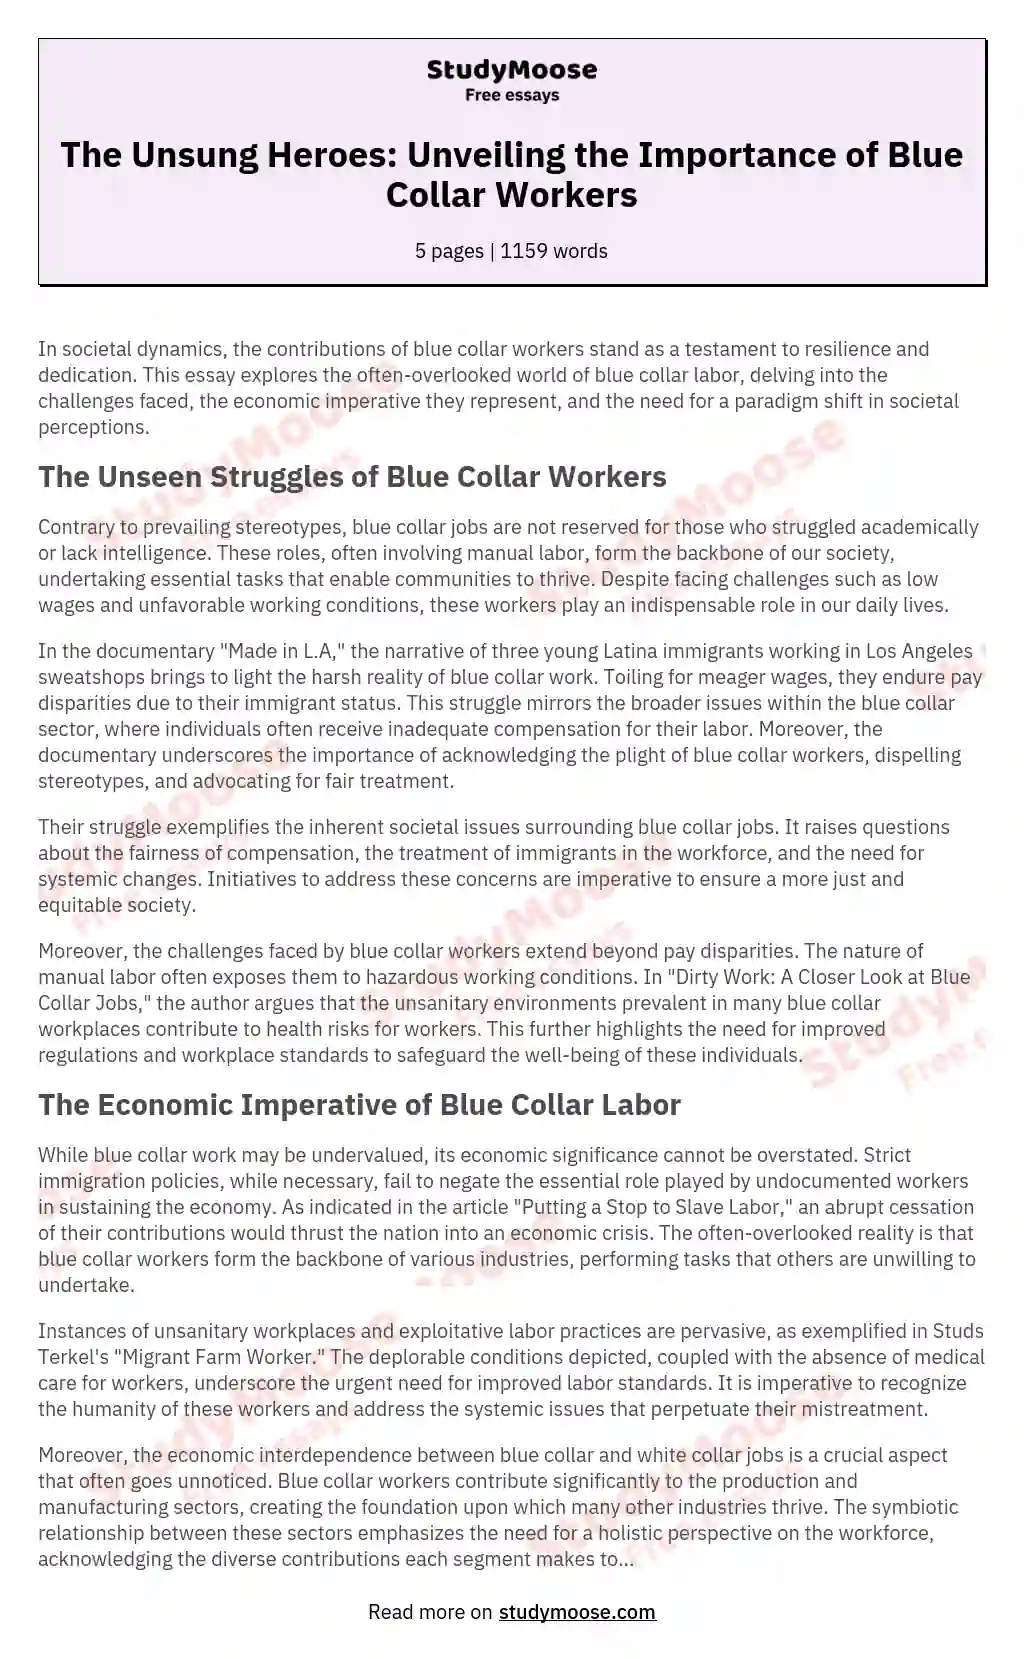 The Unsung Heroes: Unveiling the Importance of Blue Collar Workers essay